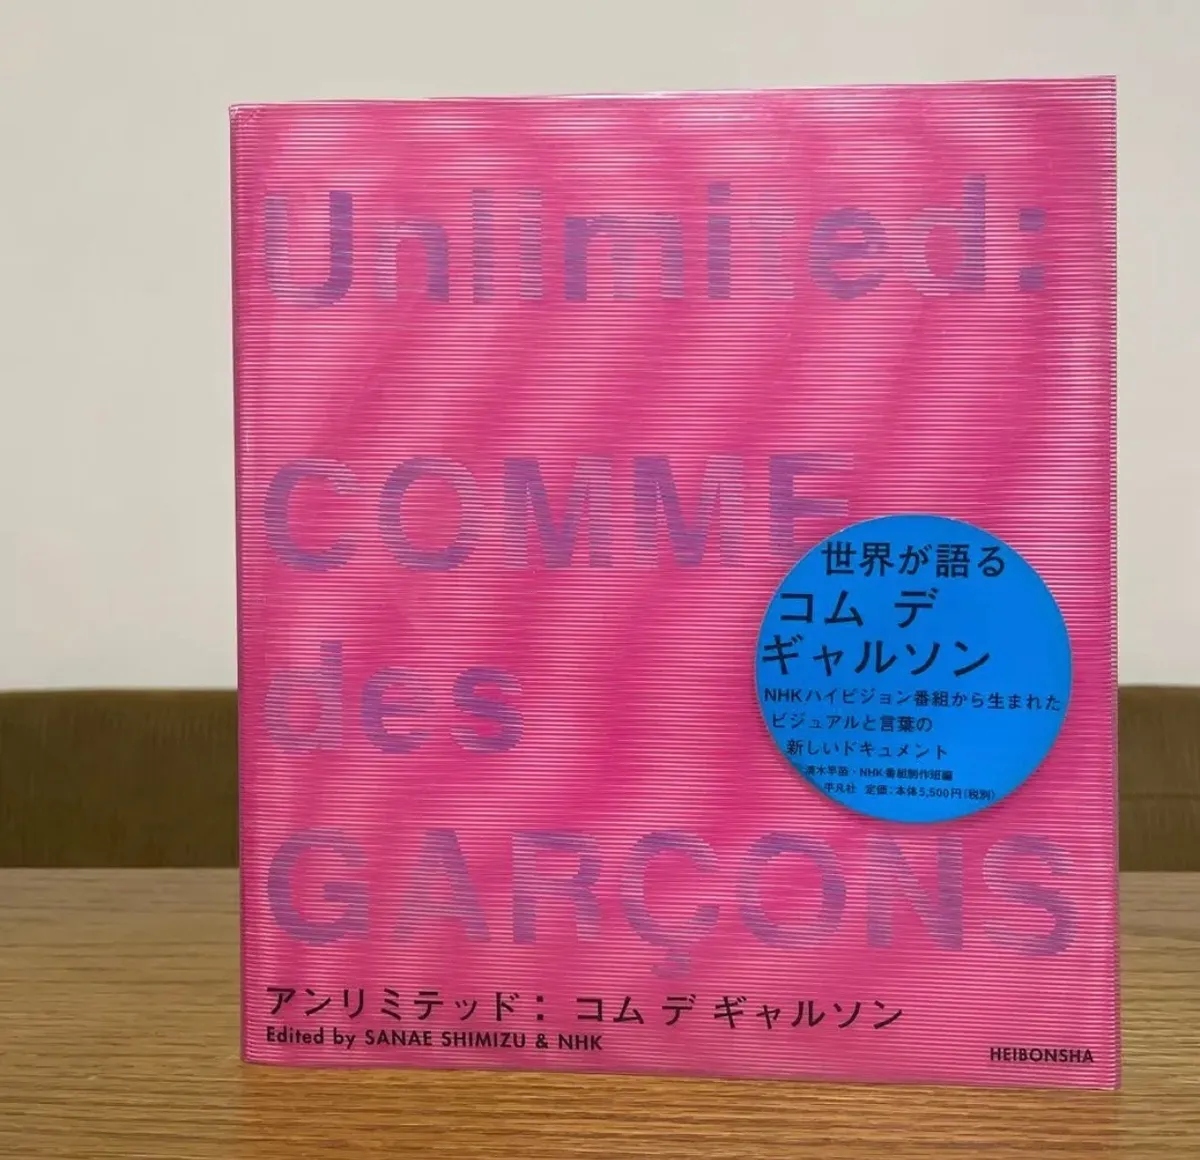 UNLIMITED COMME DES GARCONS PHOTO BOOK Edited by Sanae Shimizu English  Japanese